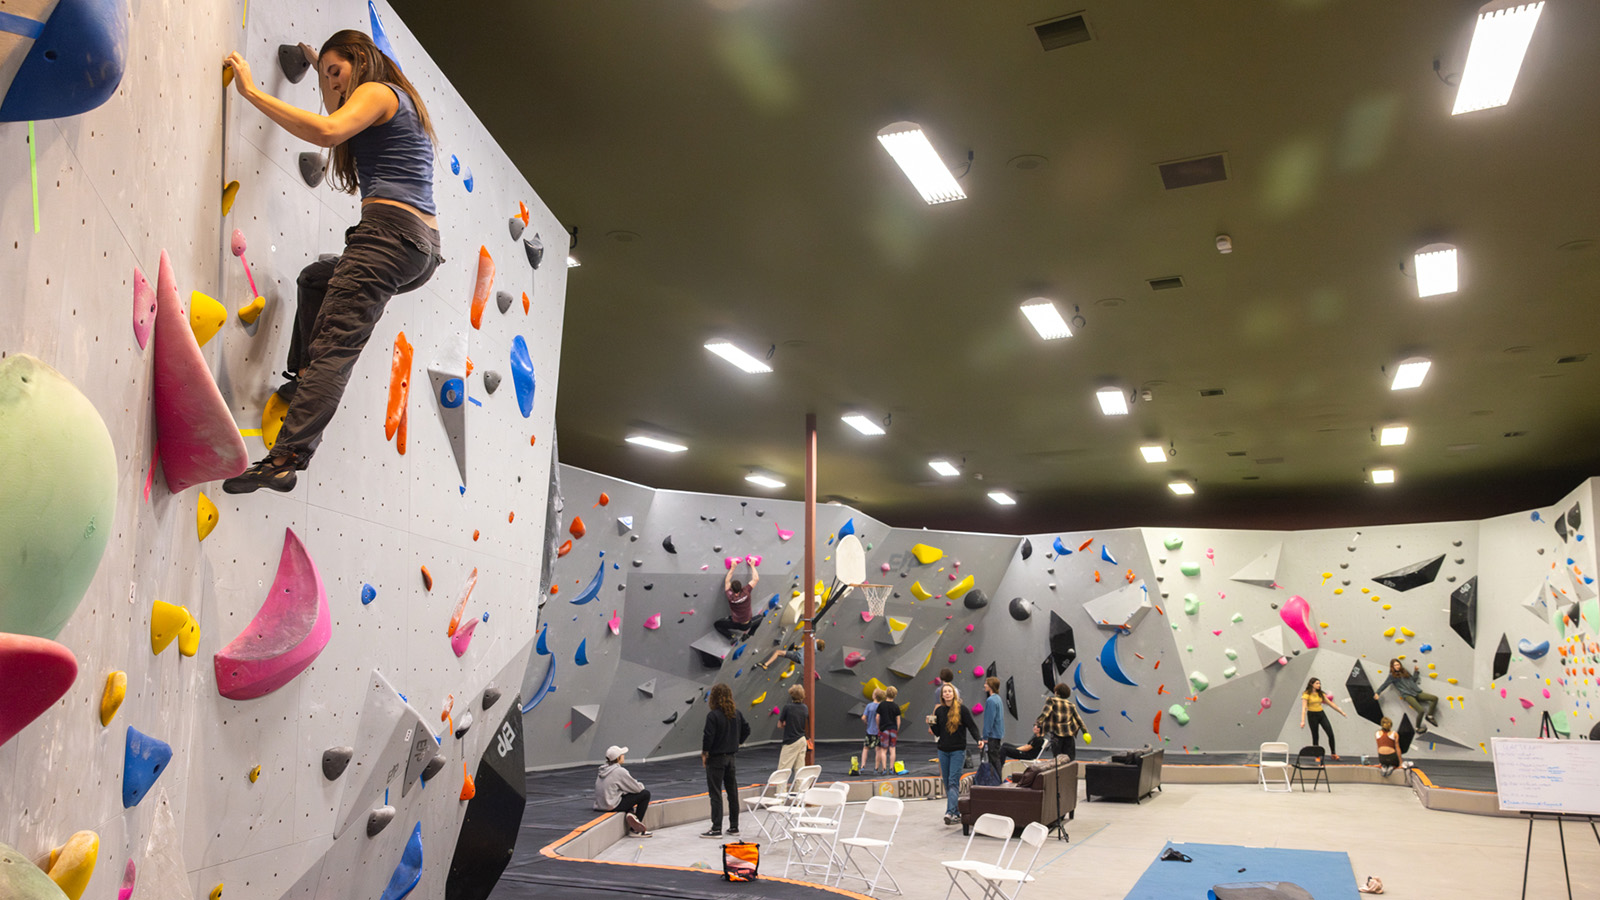 Climbing walls at the Bend Endurance Academy in Bend, OR